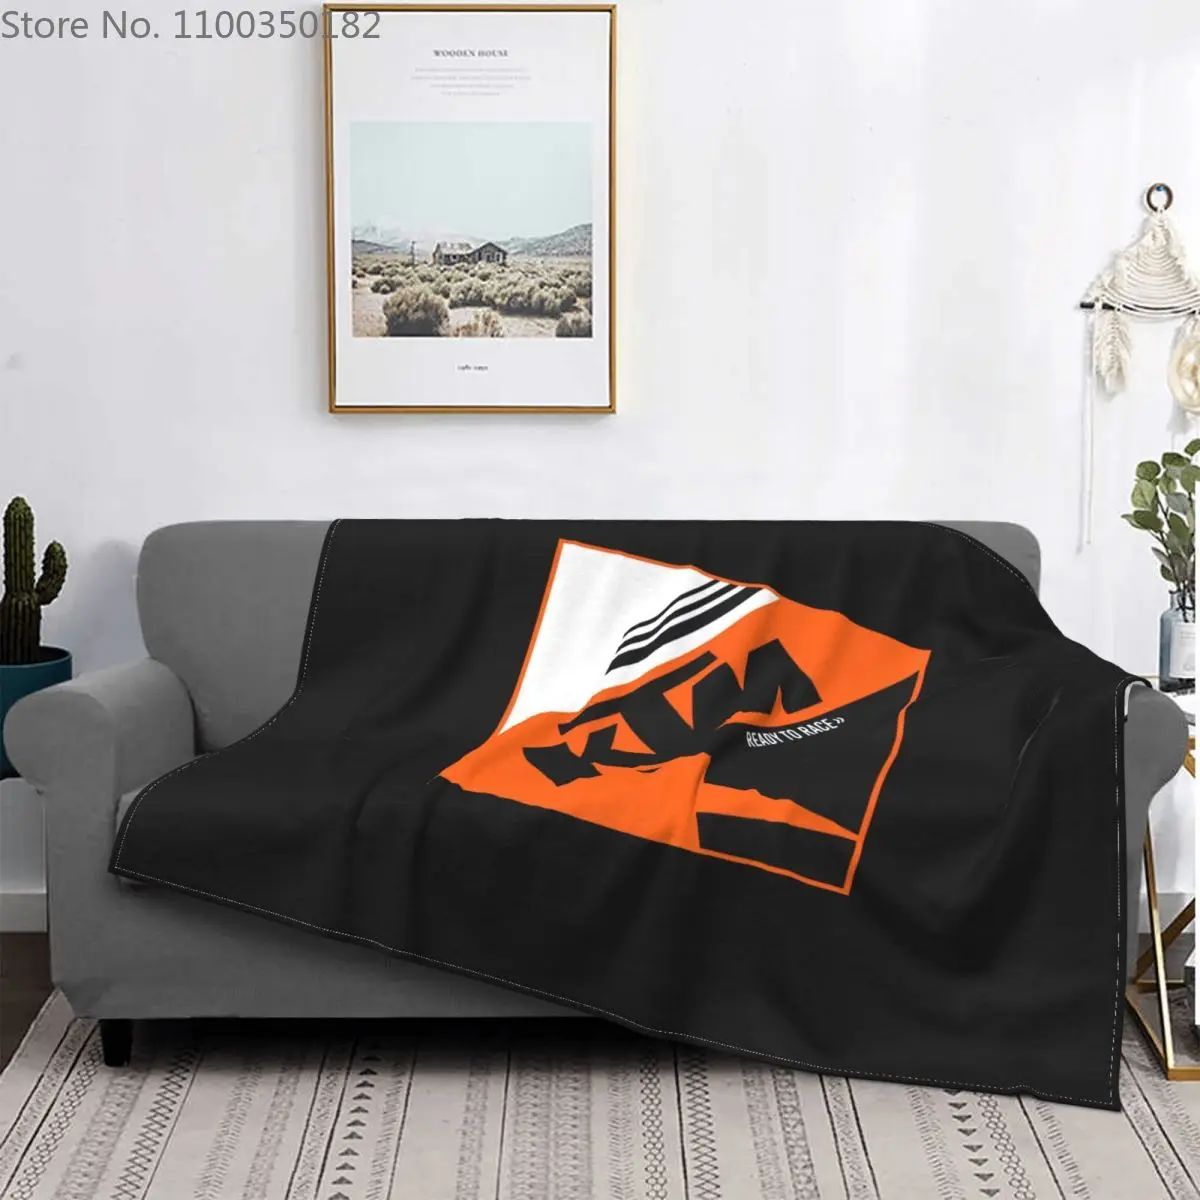 New Selling Custom Print Flannel Soft Blanket Ready To Race Ag Sport Motorcycle Racing Factory Racing Motorcycle Enduro